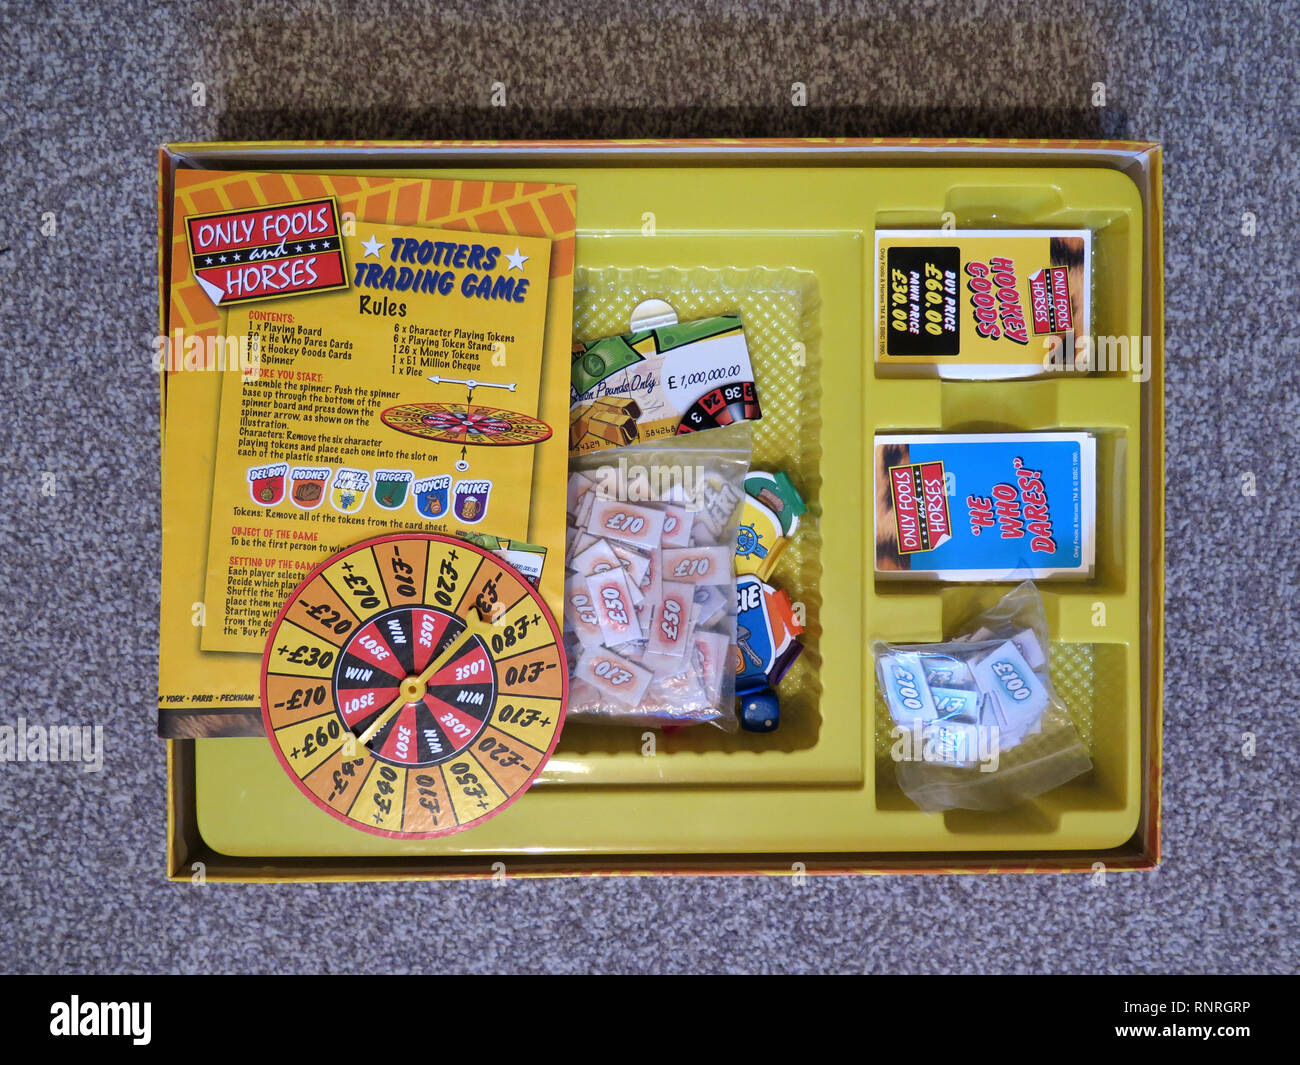 Trotters trading game only fools and horses Stock Photo